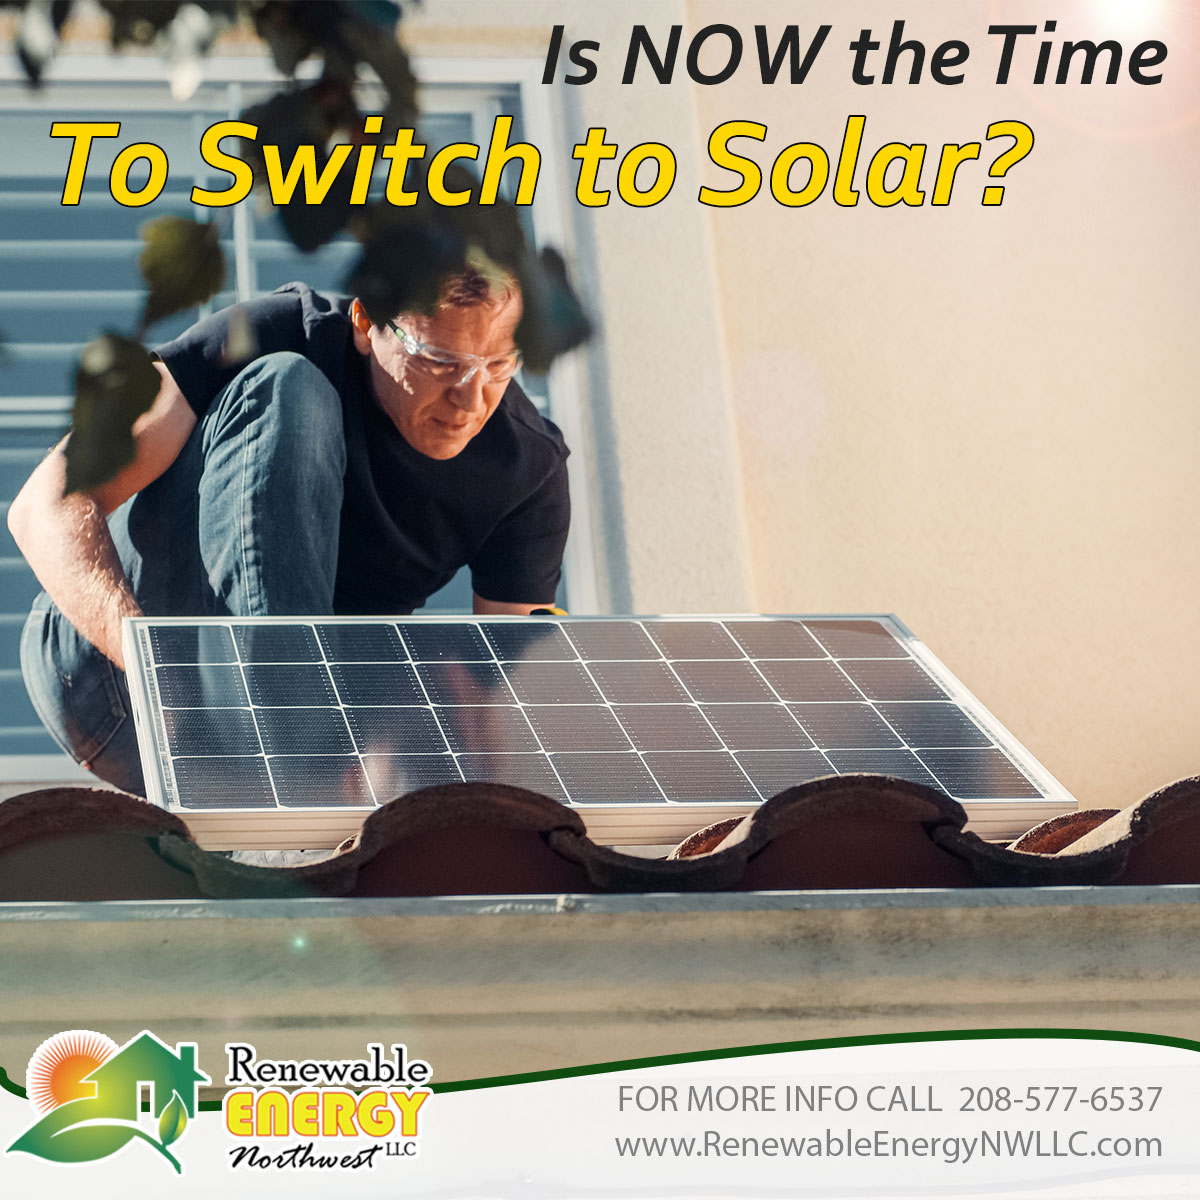 Is Now a Good Time to Go With Solar for Your Home?